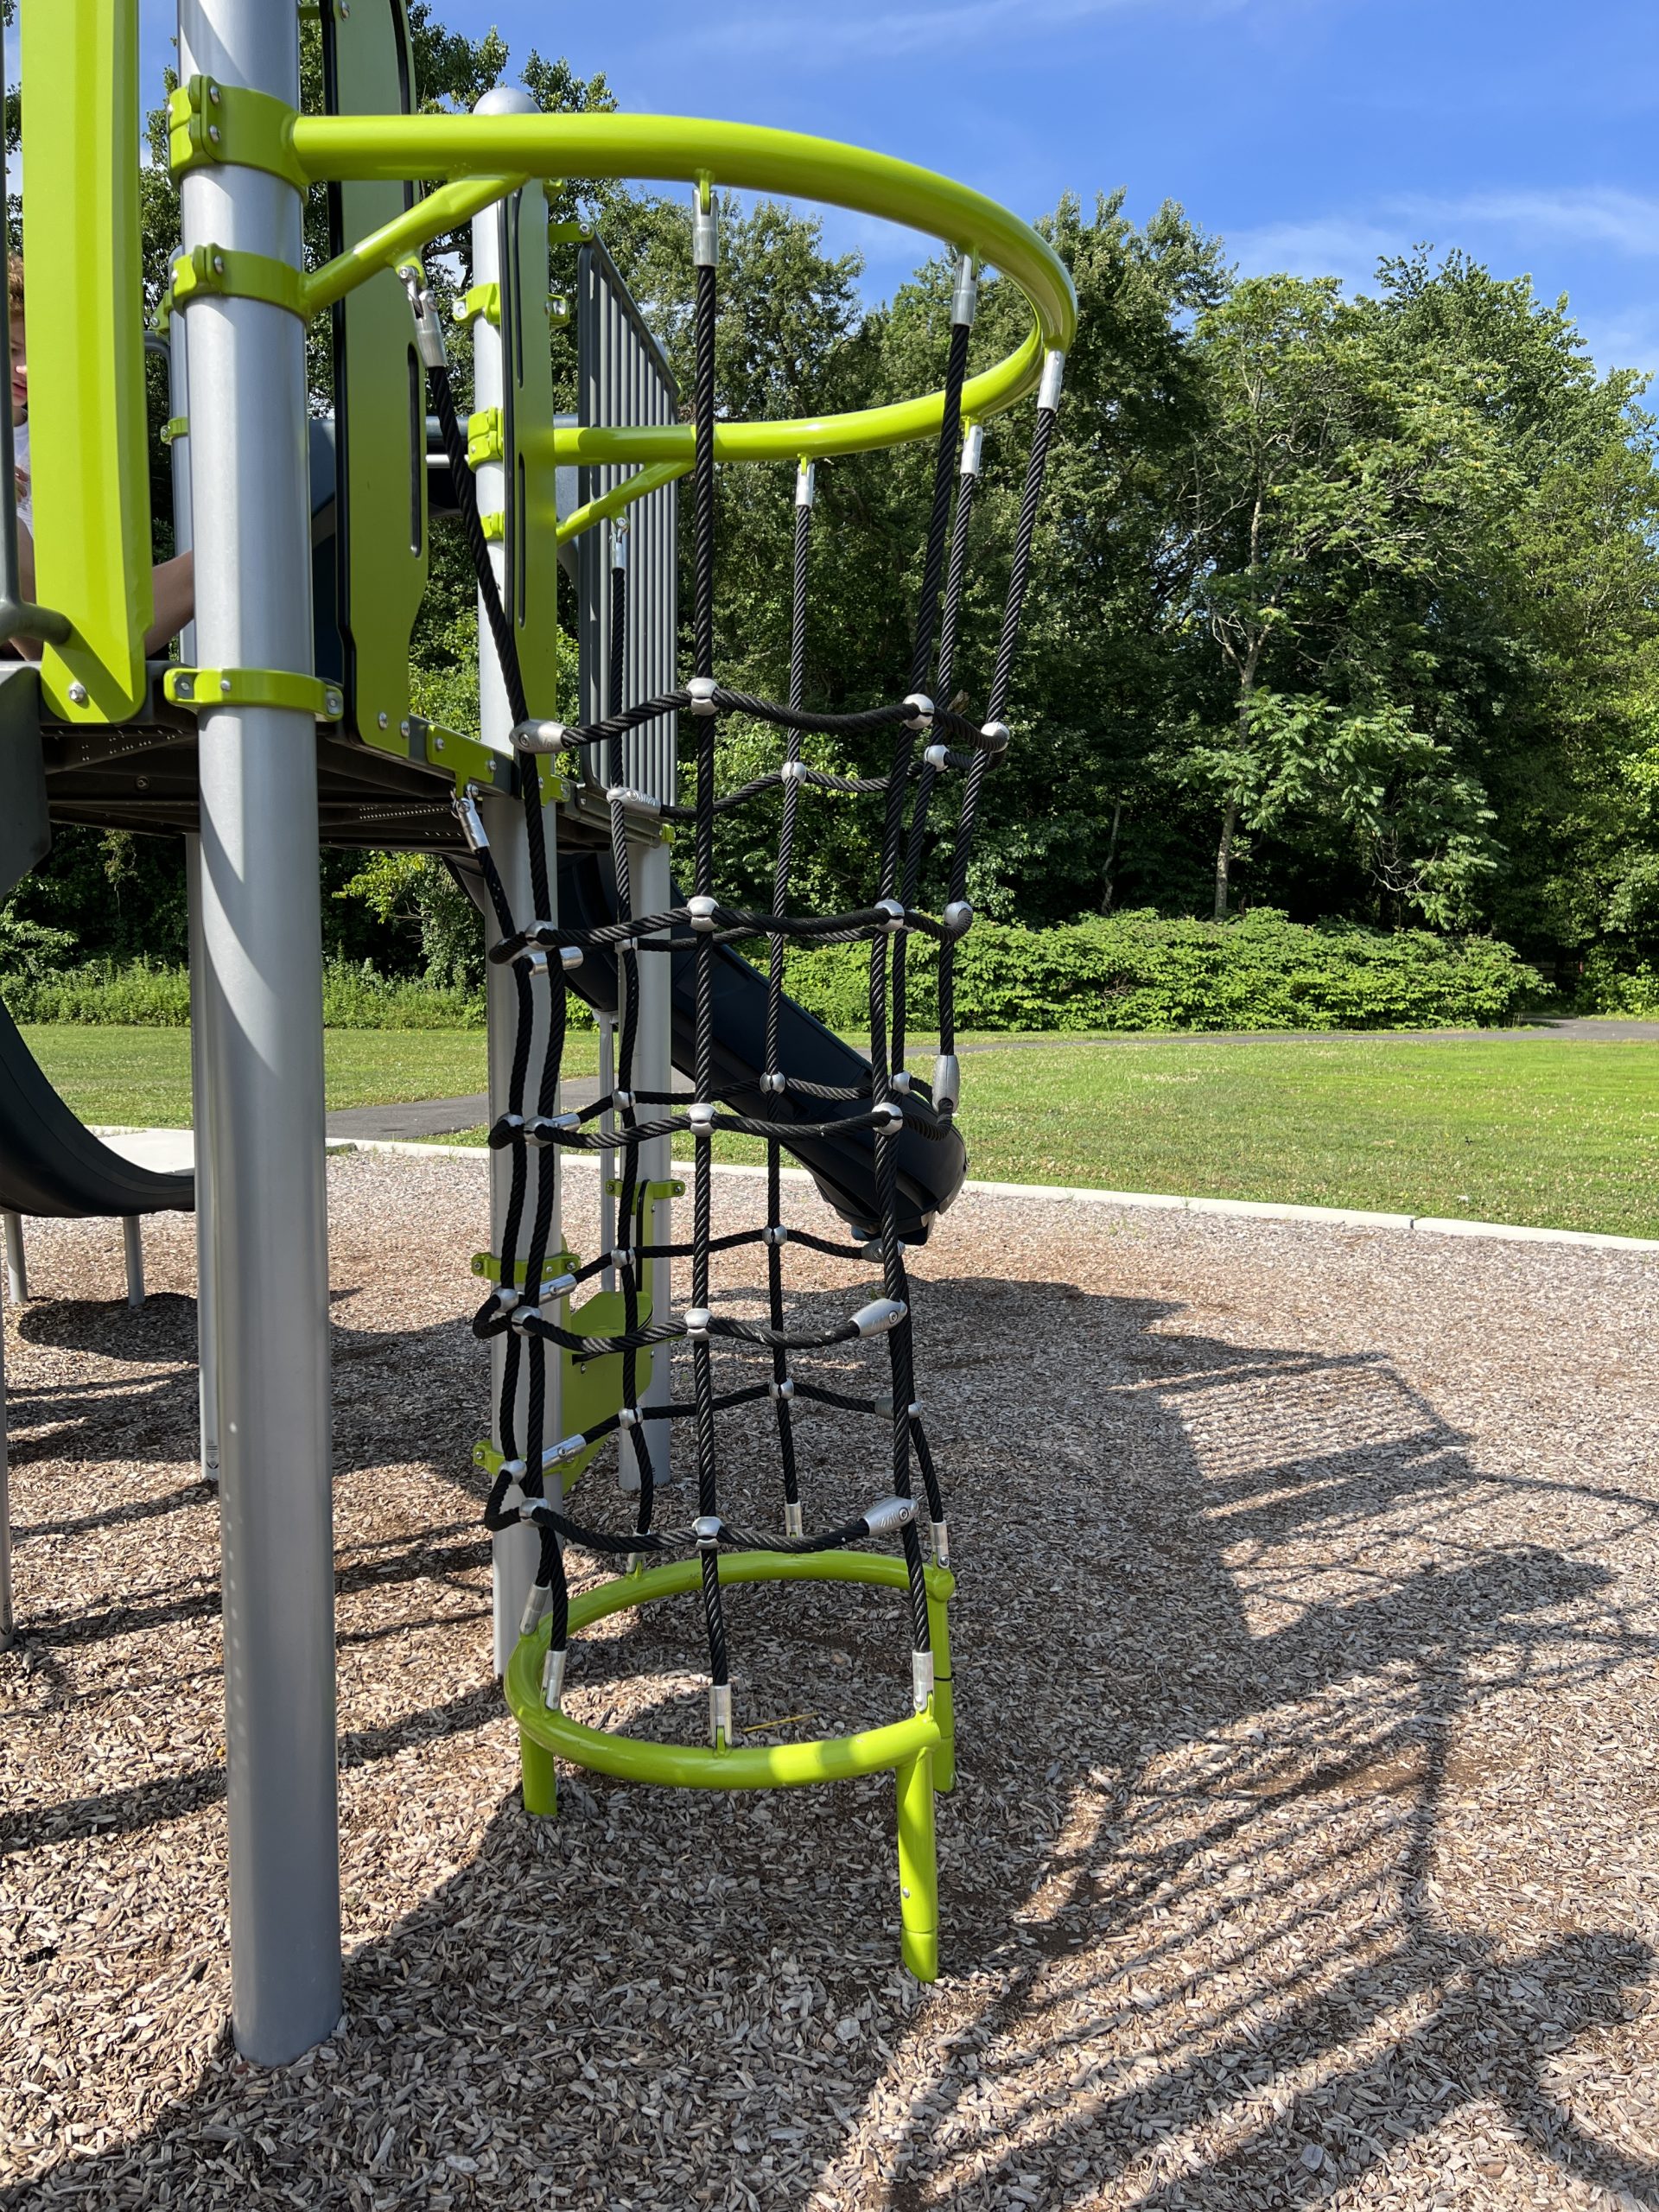 Larger Playground at Berlin Park Playgrounds in Berlin New Jersey rope tube ladder 1